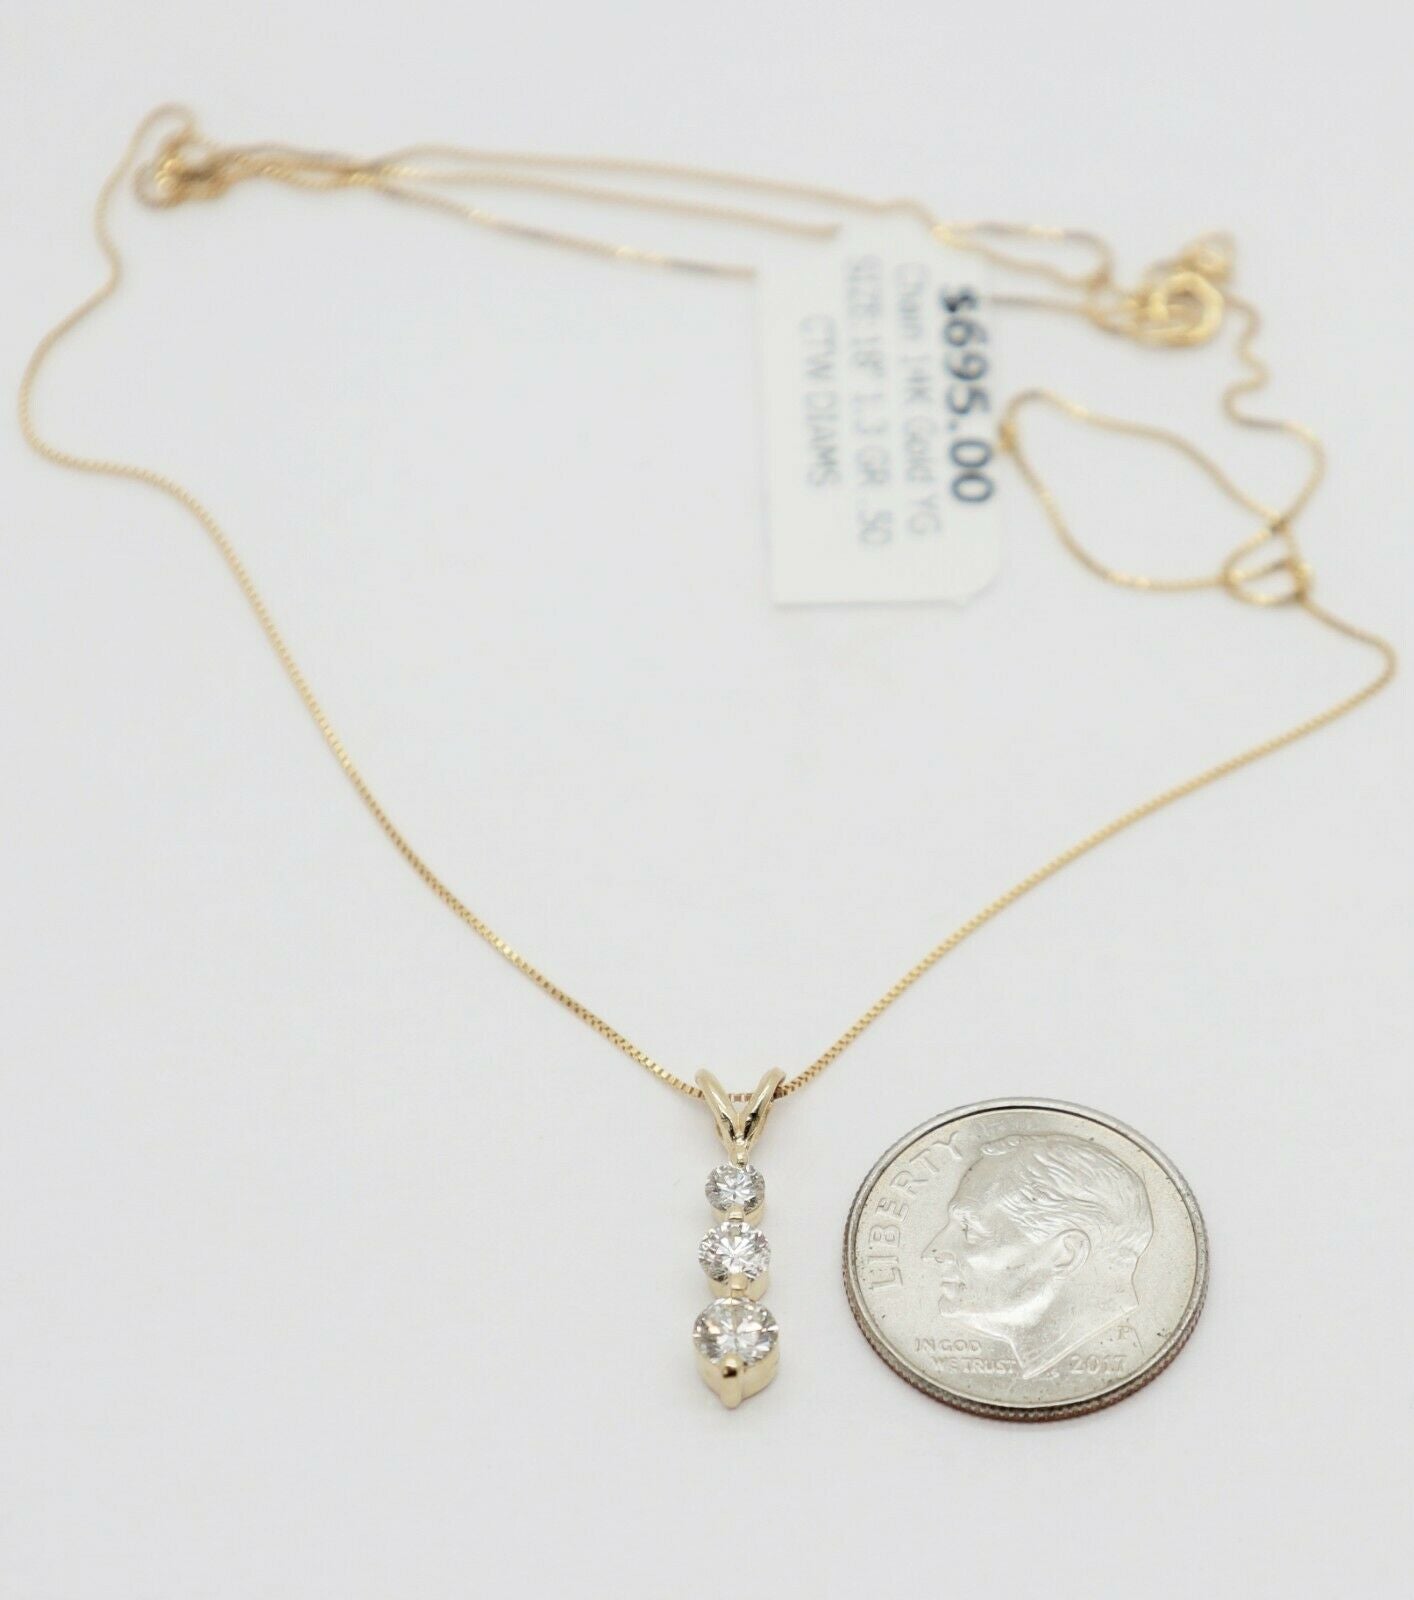 NEW 14k Yellow Gold Diamond Pendant Necklace, 18 inches - 1.3g